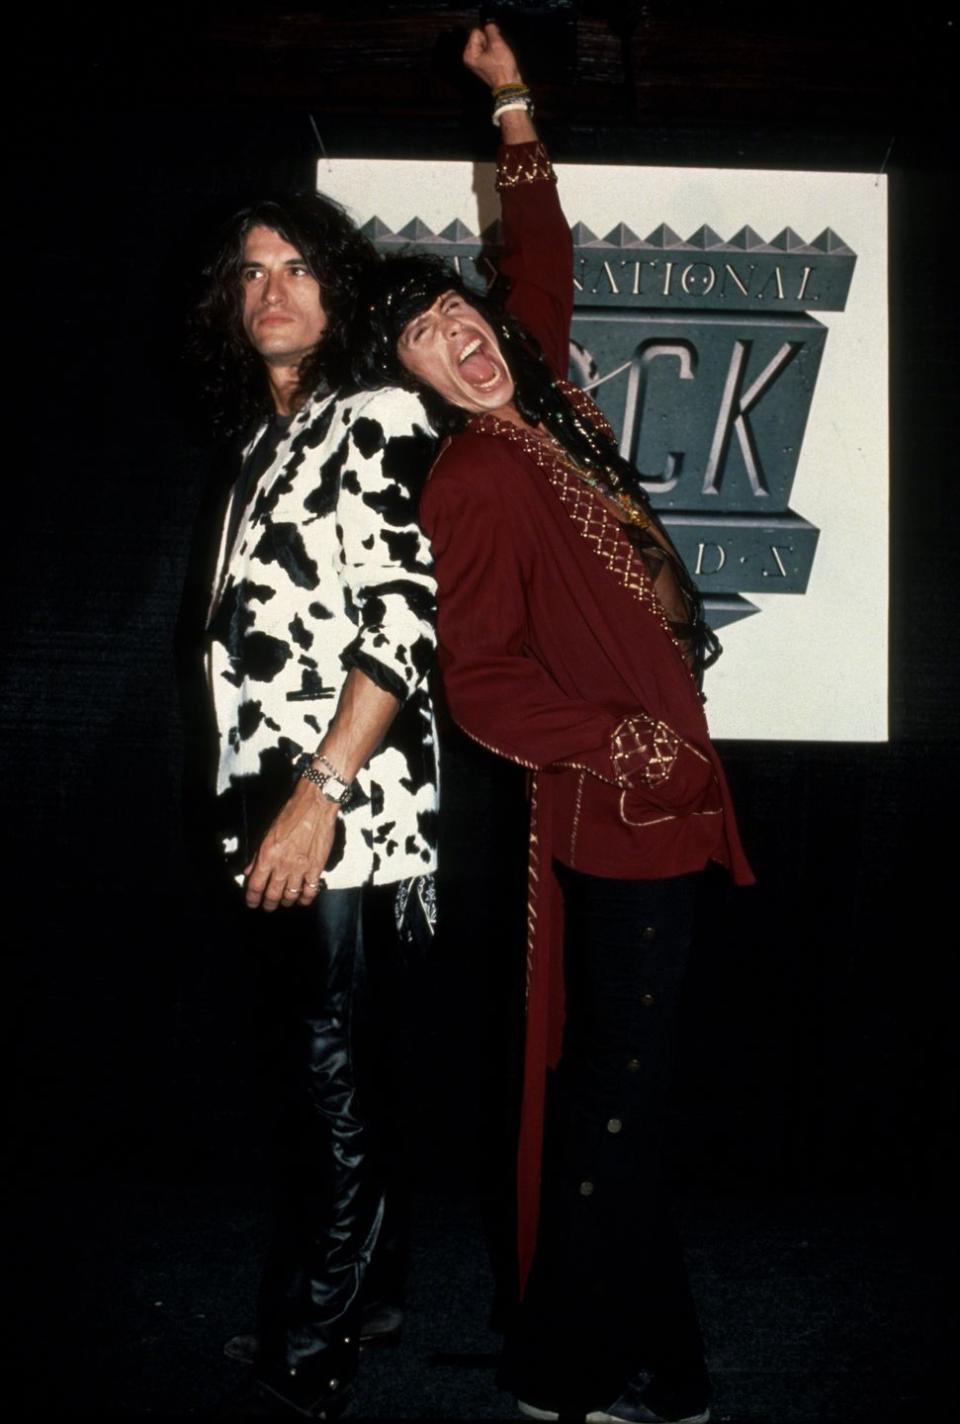 joe perry and steven tyler stand back to back in front of a poster, perry is wearing a cow print suit jacket and black pants, tyler is wearing a red jacket with gold accents and has one arm thrust over his head in the arm